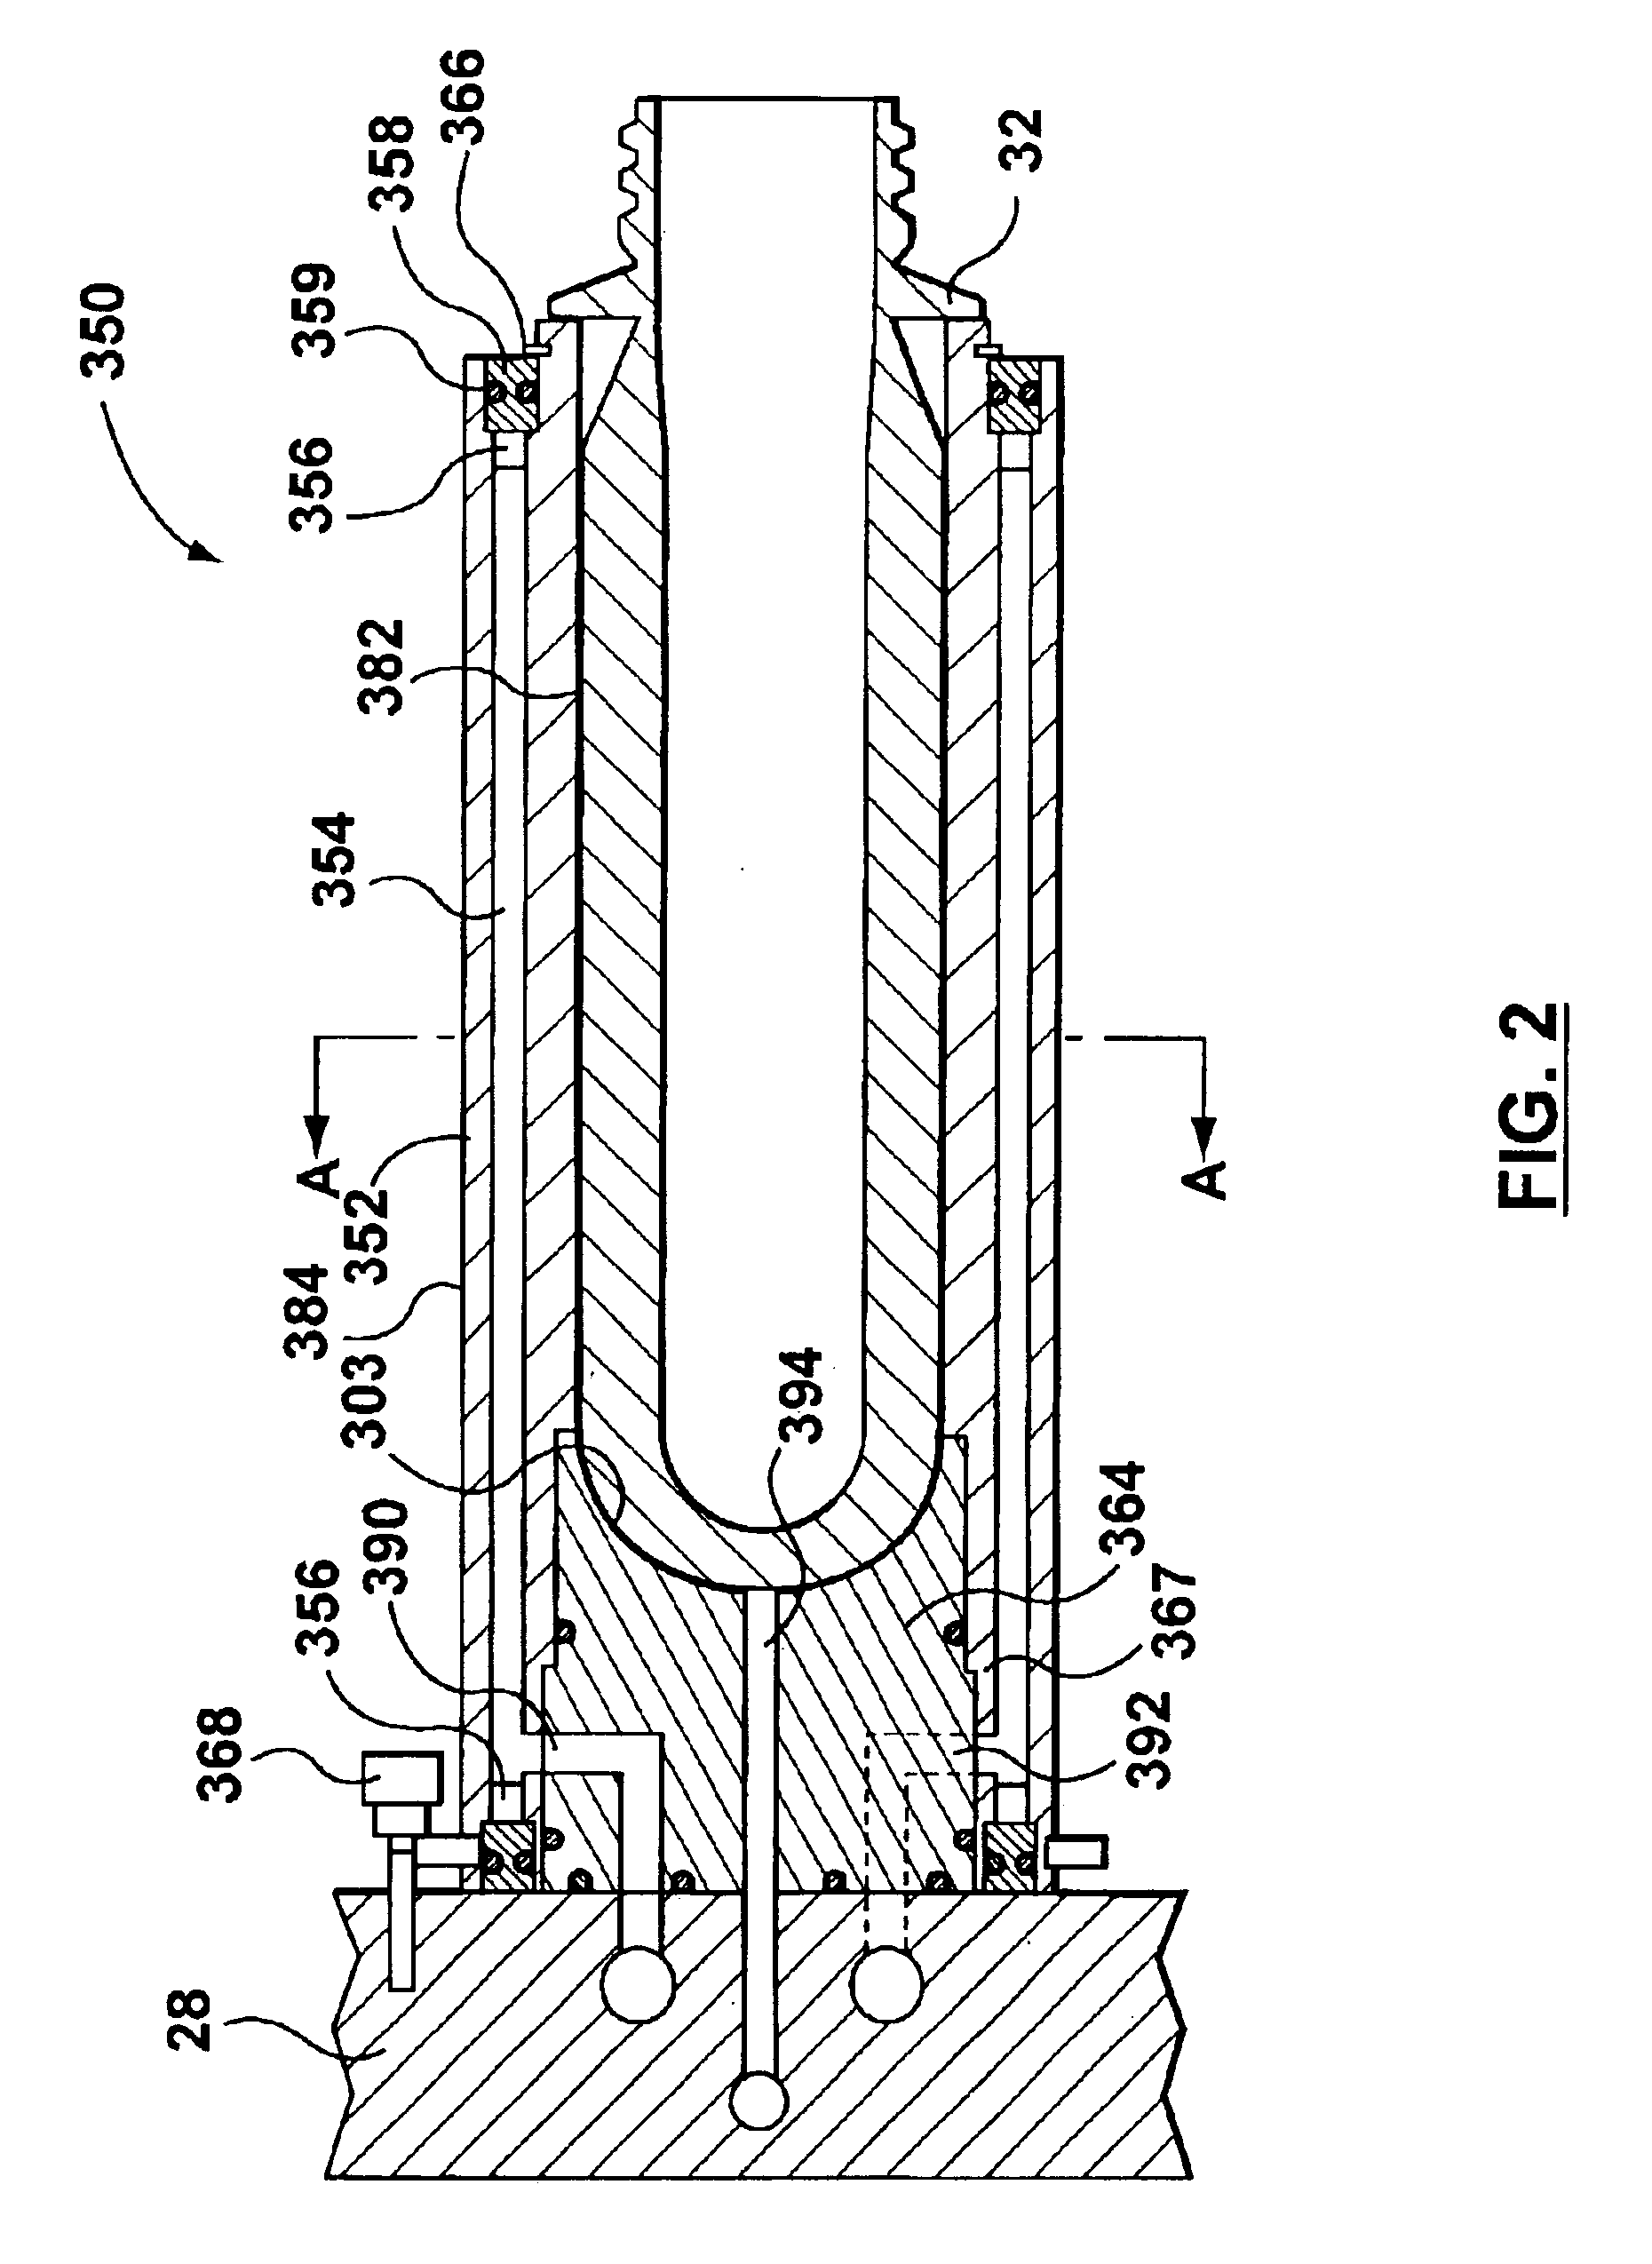 Cooling tube for cooling a portion of an injection molded article